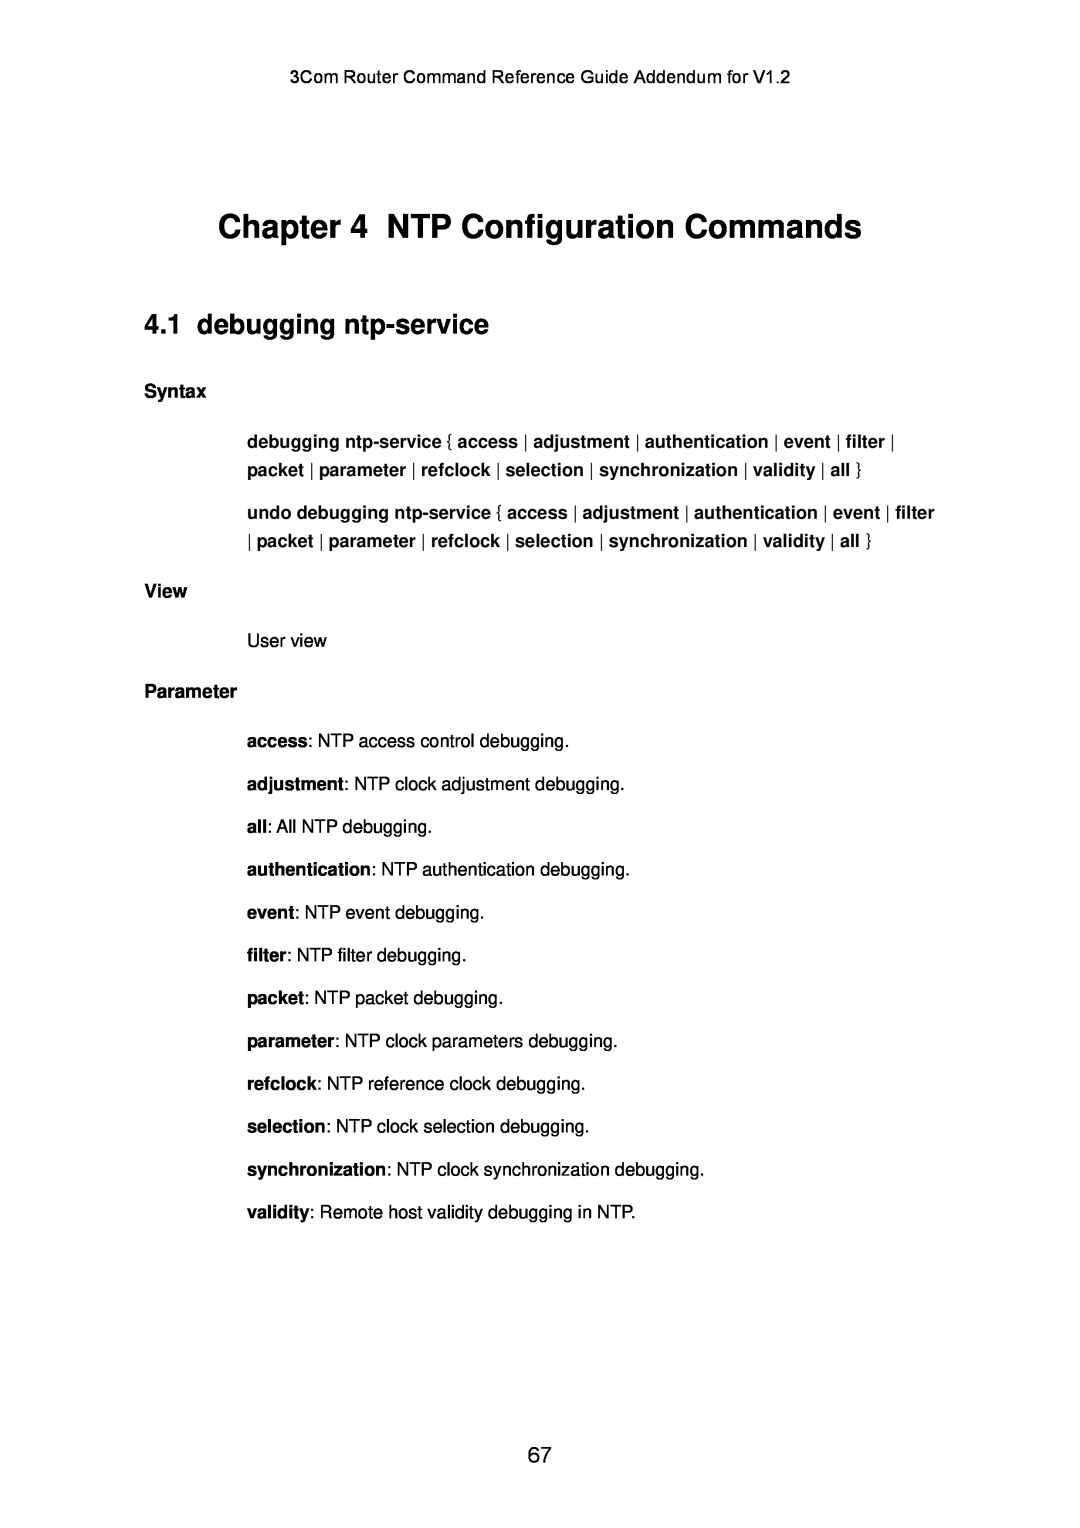 3Com 10014302 manual NTP Configuration Commands, debugging ntp-service, Syntax, View, Parameter 